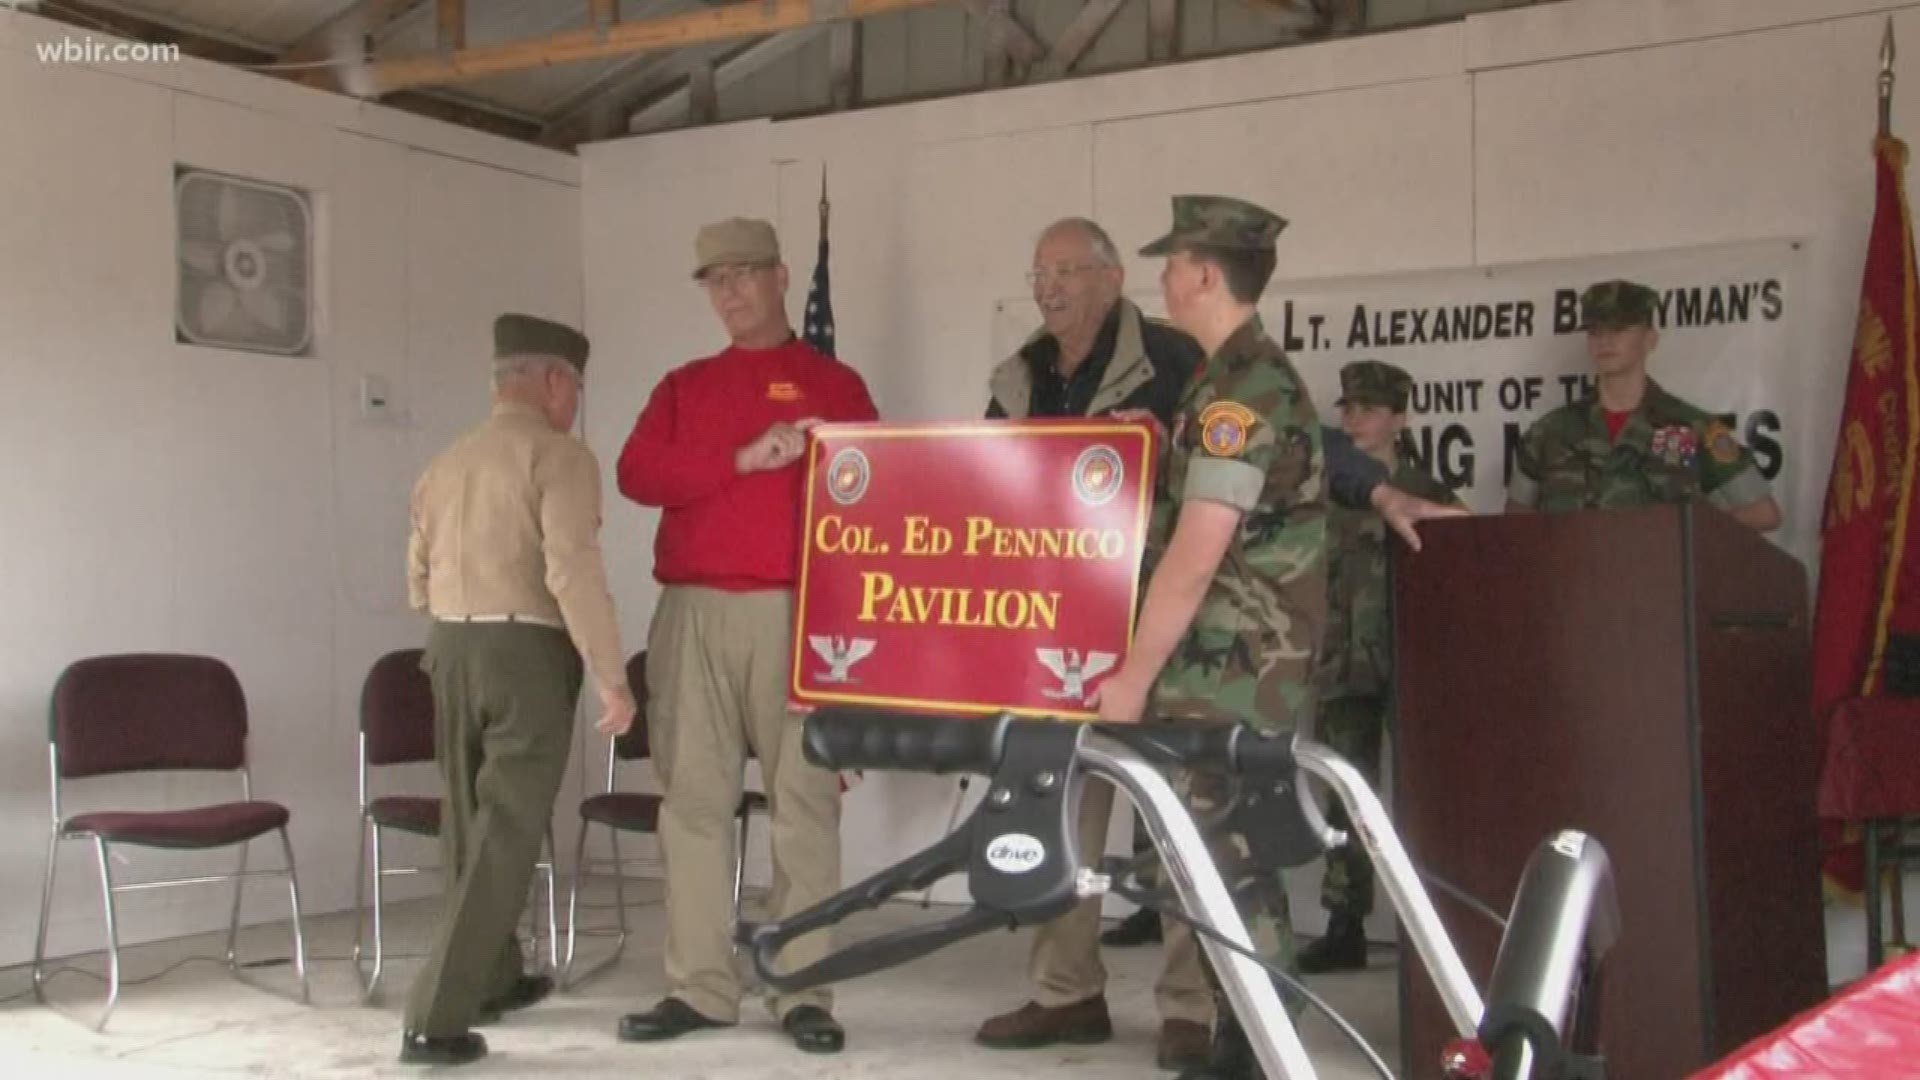 The Young Marines group in Knoxville dedicated a pavilion in the former colonel's name.